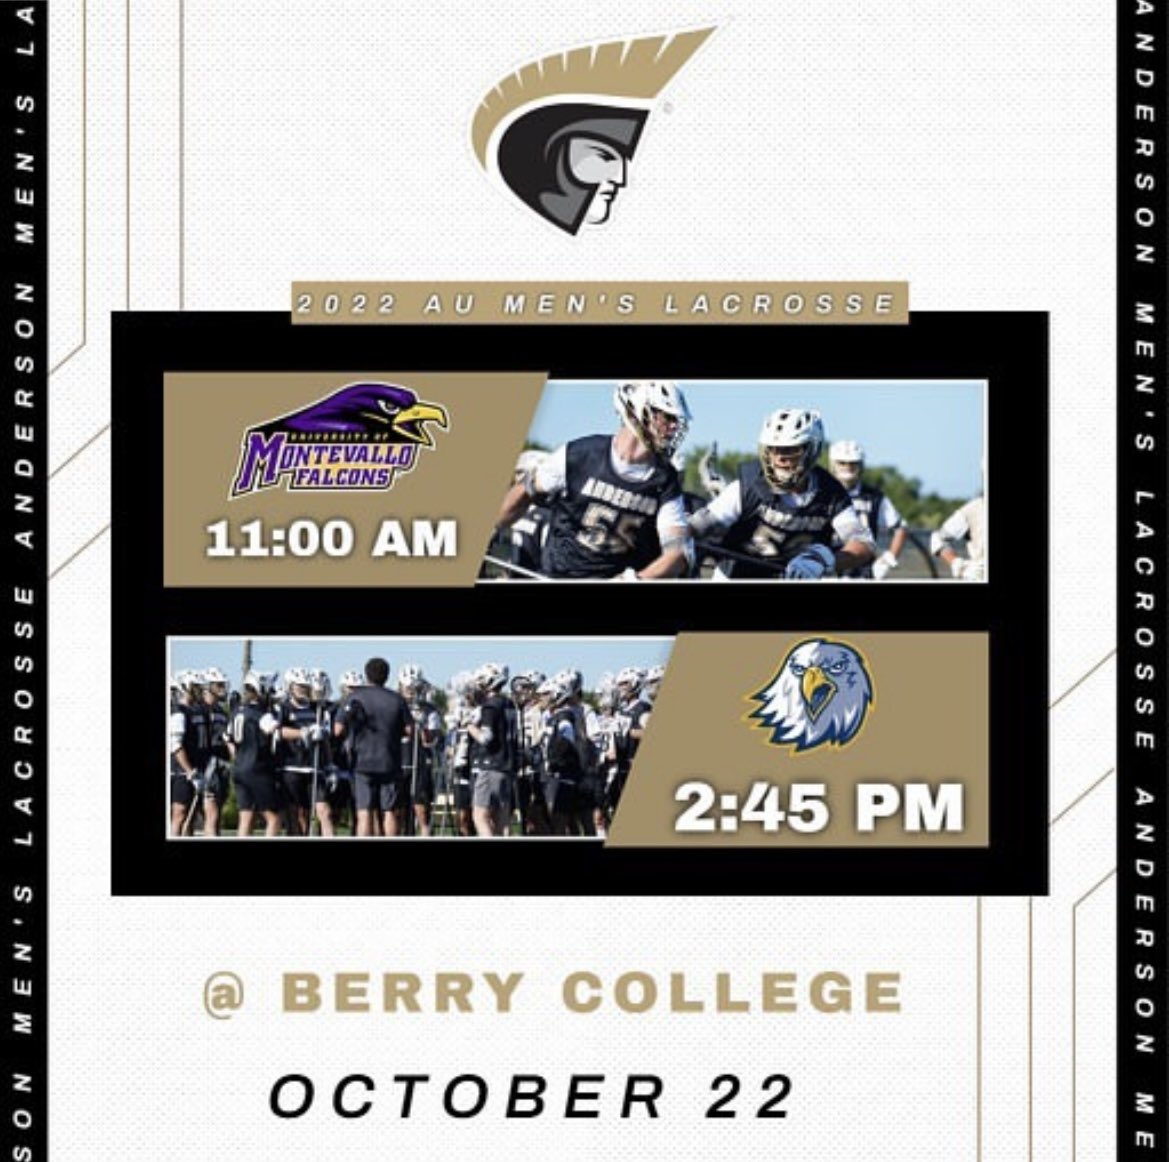 First GAMEDAY for this year’s squad! We’re heading down to Berry College today for the 7th annual Faceoff For a Cause. All proceeds go towards @hilinskishope to promote awareness and education of mental health for athletes.